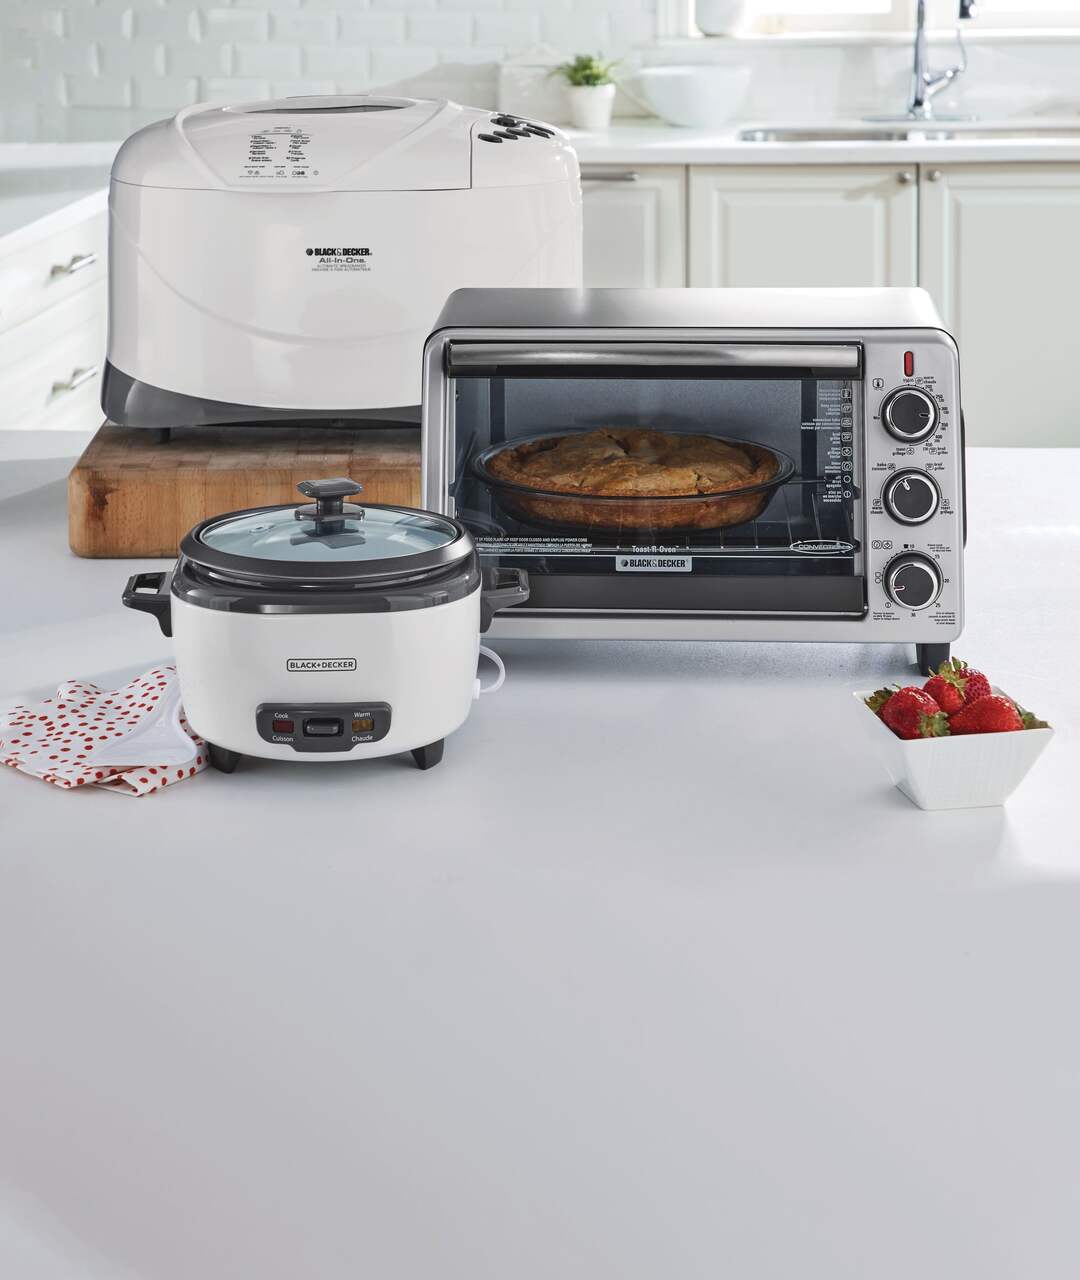 https://media-www.canadiantire.ca/product/living/kitchen/kitchen-appliances/0431372/black-decker-6-cup-rice-cooker-4ff6a67a-fe6b-4ea8-8779-9a3f04305176-jpgrendition.jpg?imdensity=1&imwidth=1244&impolicy=mZoom